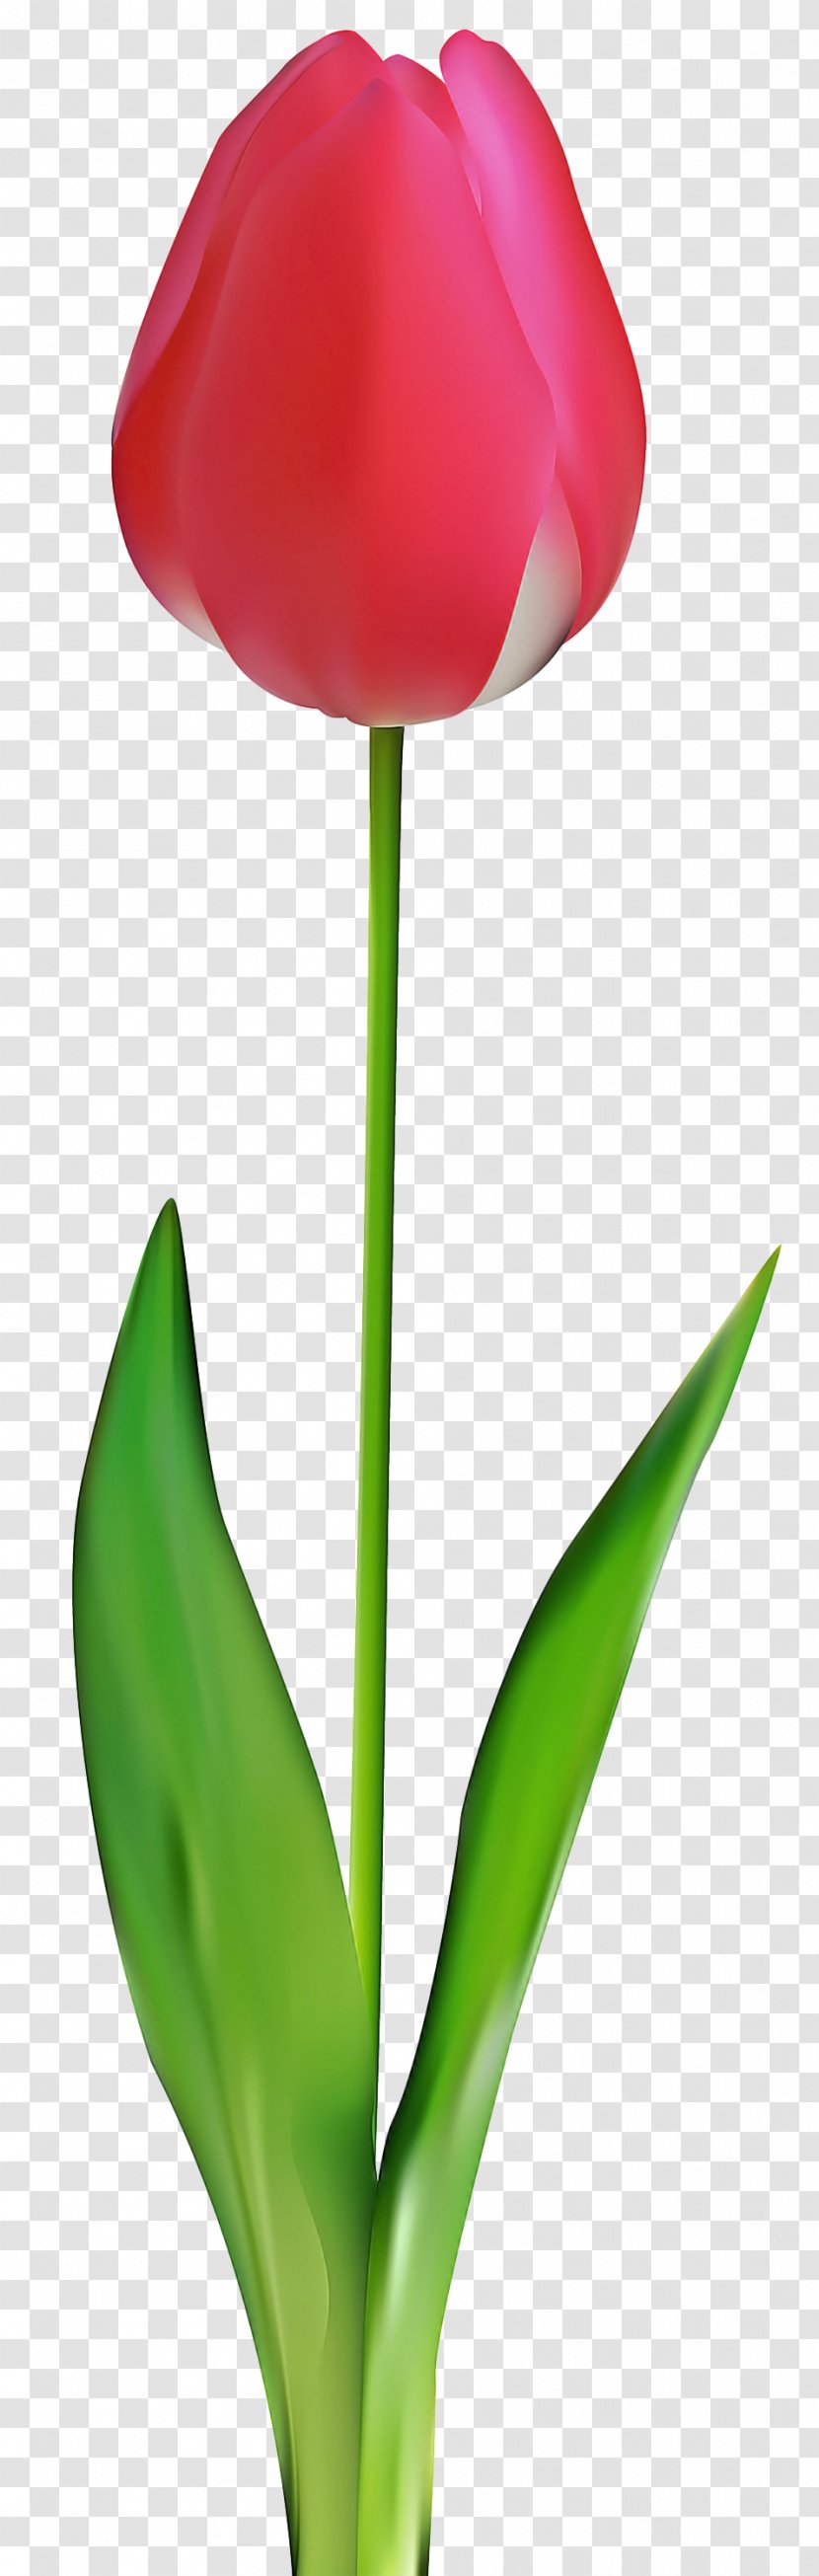 Lily Flower Cartoon - Family - Houseplant Transparent PNG